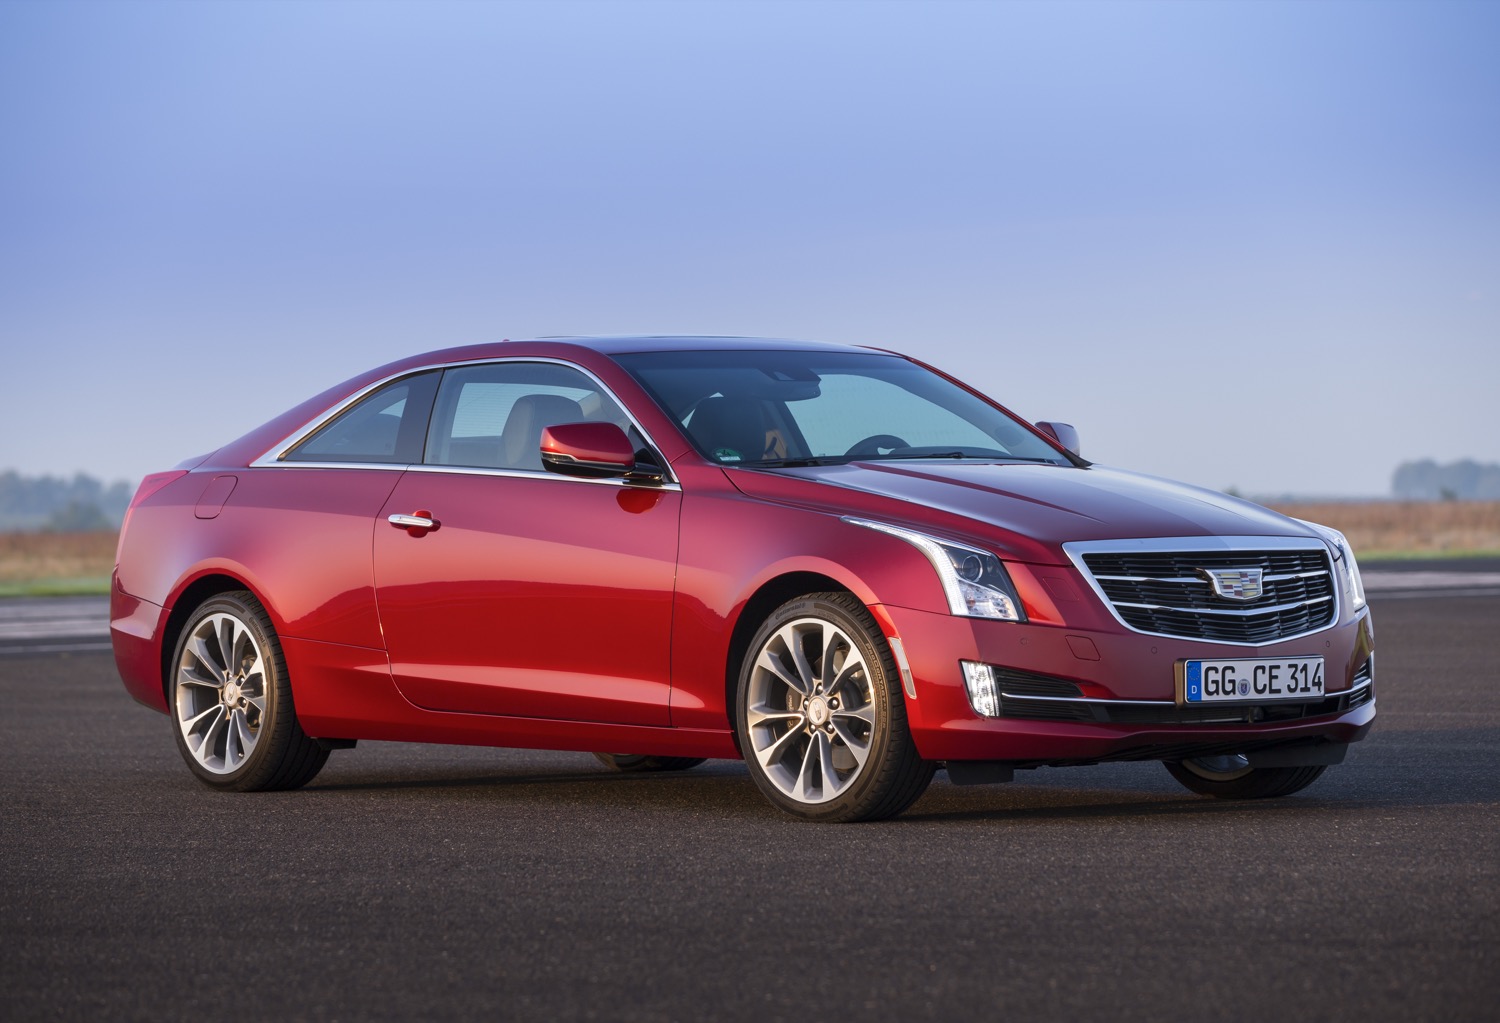 2017 Cadillac ATS Info, Specs, Pictures, Wiki | GM Authority